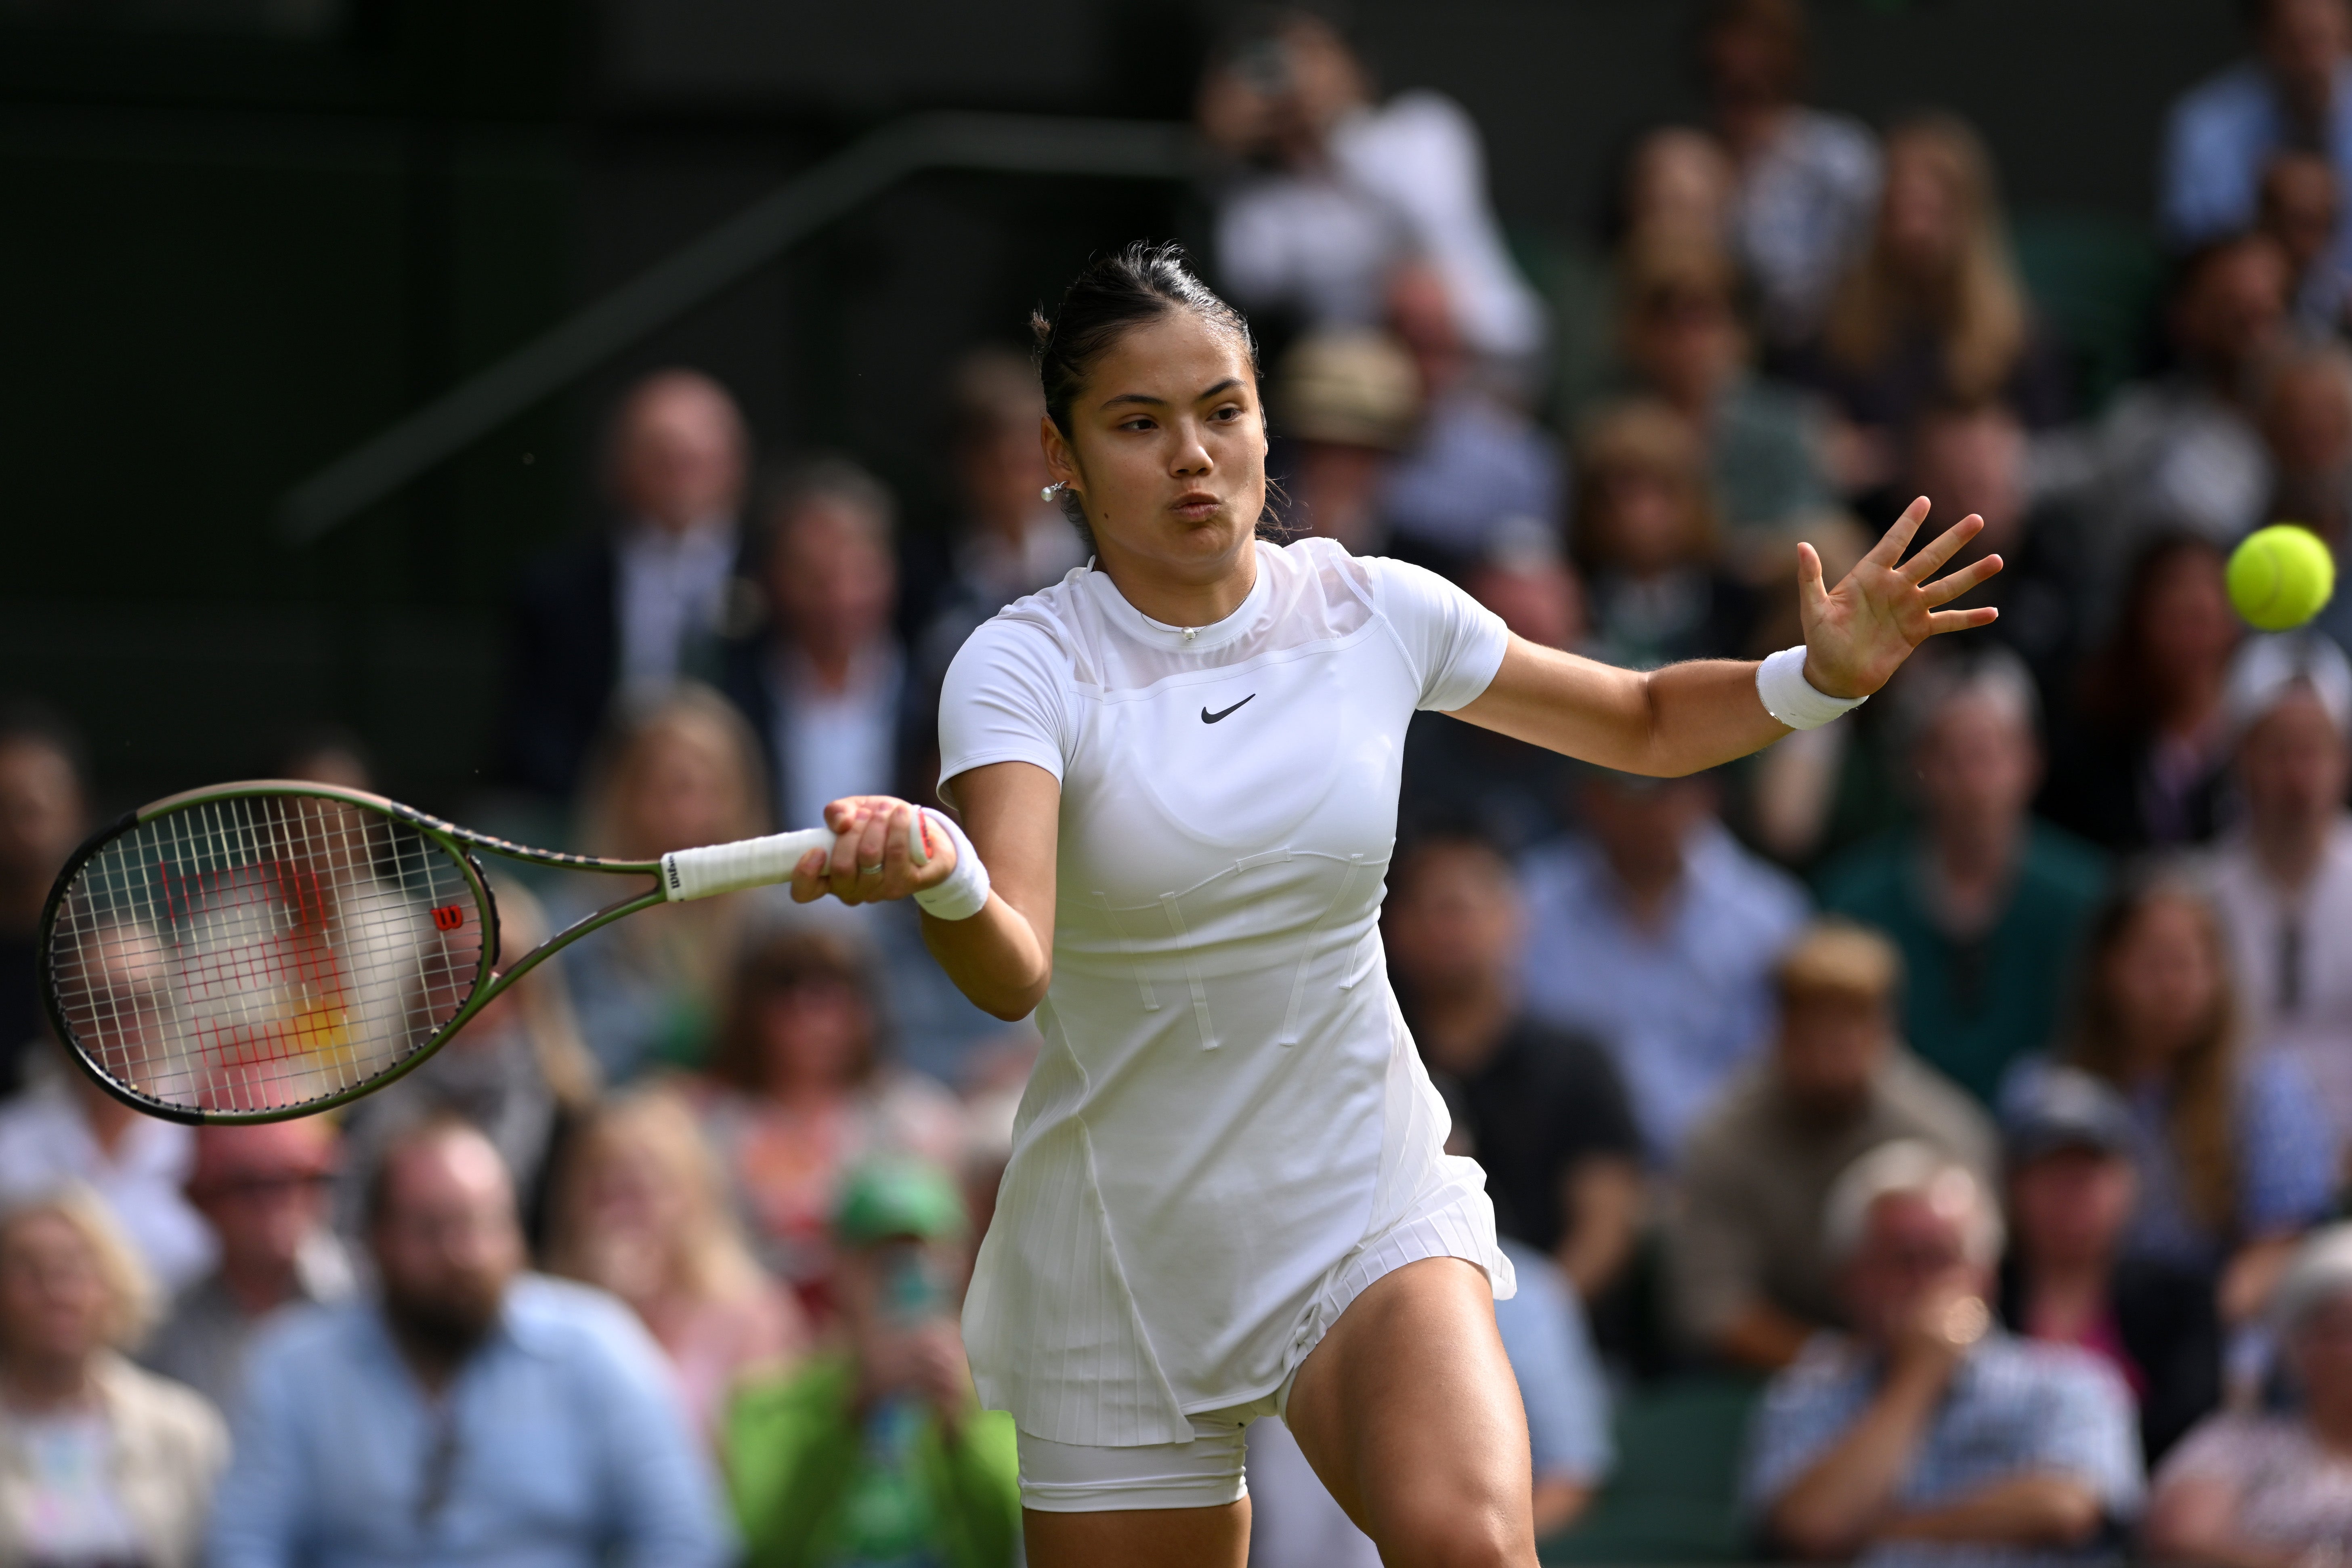 Emma Raducanu is set to compete at Wimbledon after missing the tournament last year due to injury